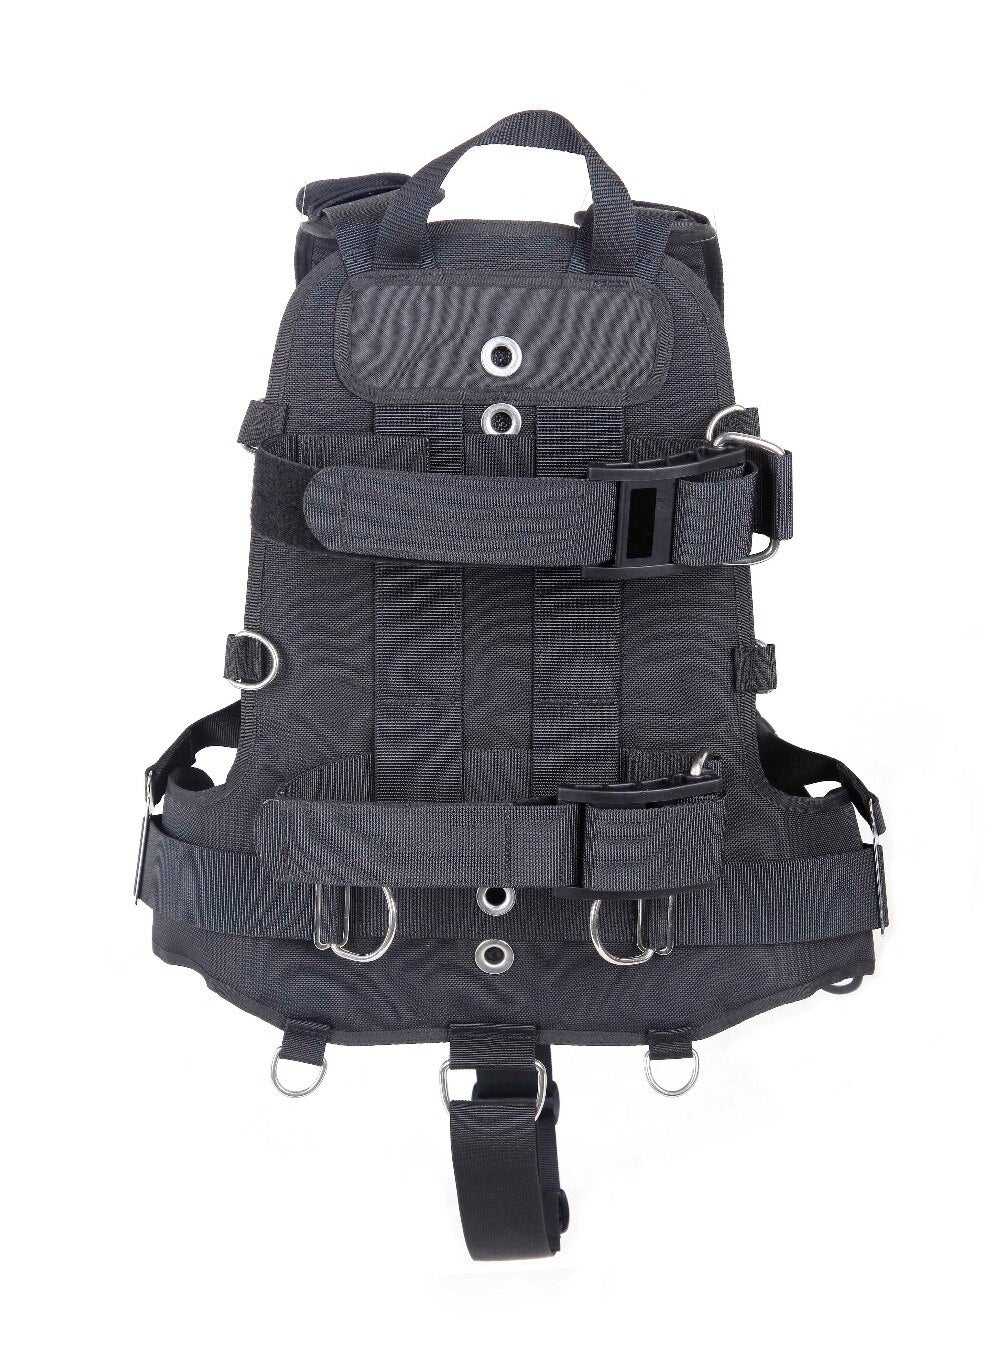 Scuba Soft Harness BCD Backmount Diving Tank Strap Cylinder Trap without Wing